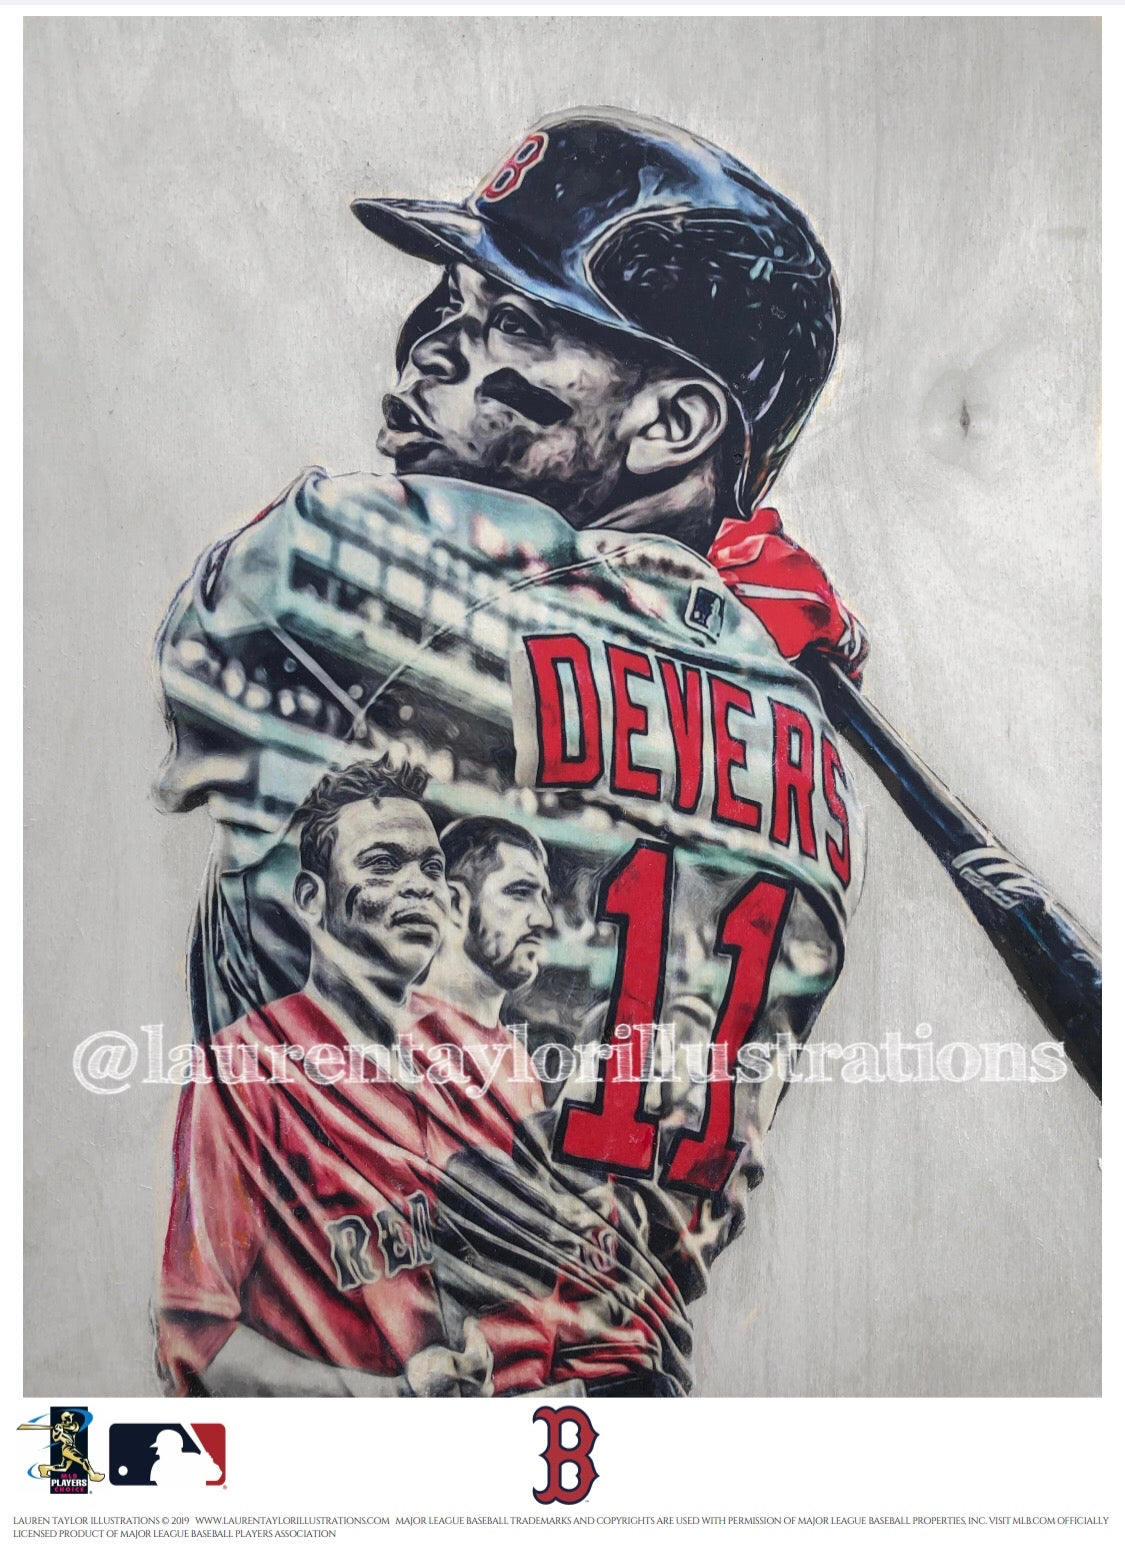 "Raffy 2 Scoops" (Rafael Devers) Boston Red Sox - Officially Licensed MLB Print - Limited Release